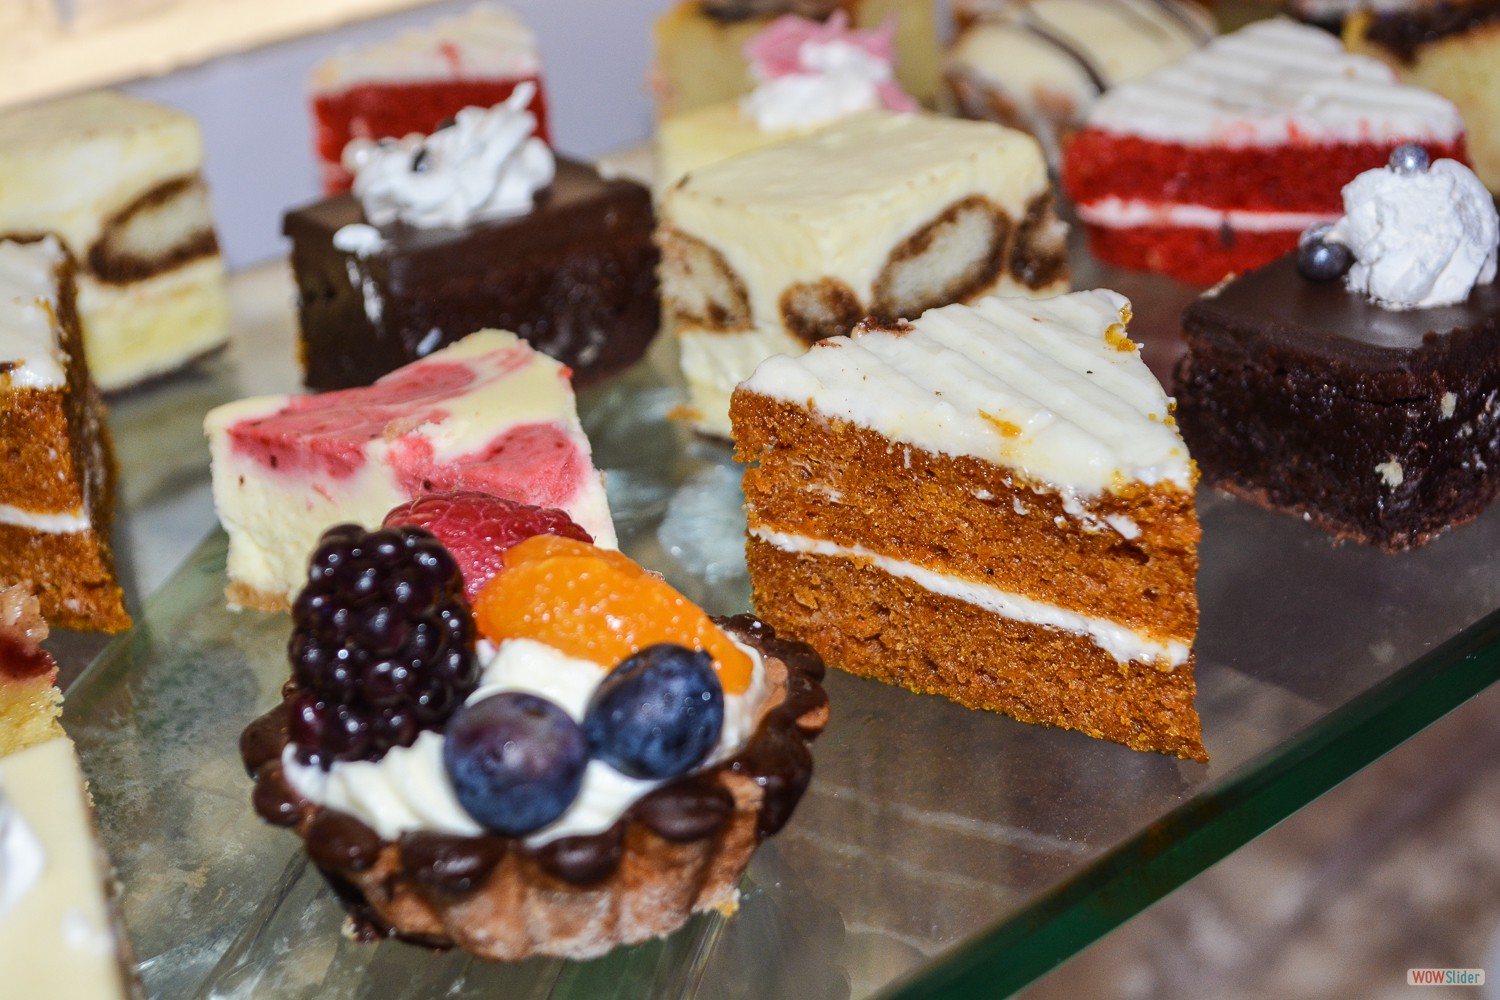 A tasty selection from the dessert bar!